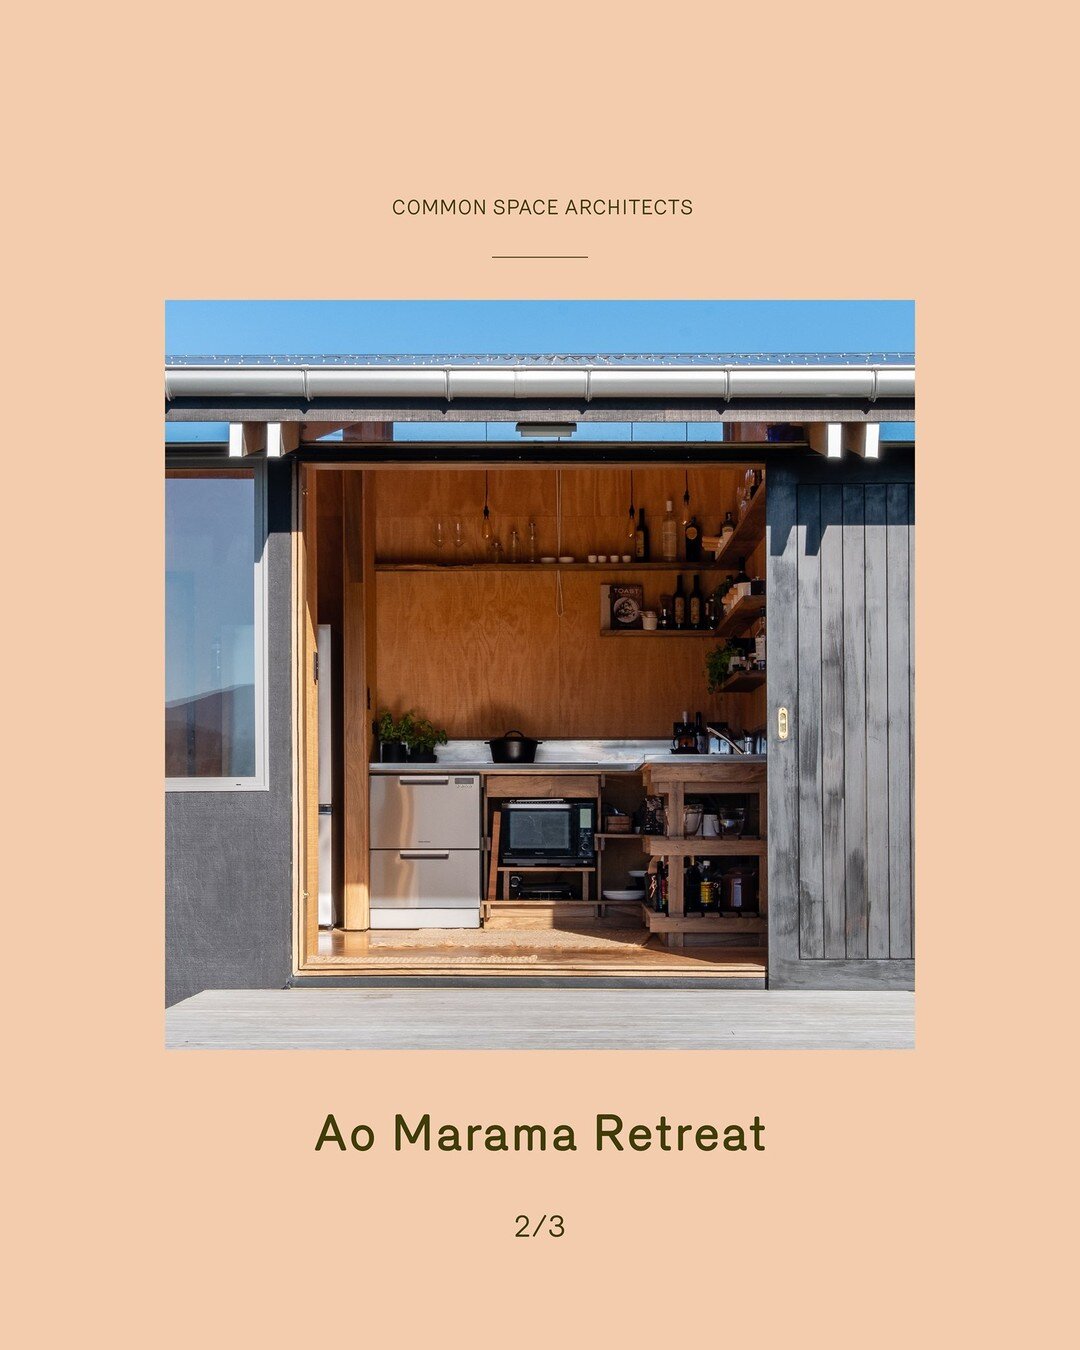 Ao Marama Retreat 2/3⁠
⁠
&ldquo;By day, there is a spectacular view over the Bay of Plenty to the sea and by night, the lights of Mount Maunganui spread out down below.&rdquo; ⁠
⁠
-  Here Magazine Summer Issue 2020⁠
_________⁠
Read more about this pr